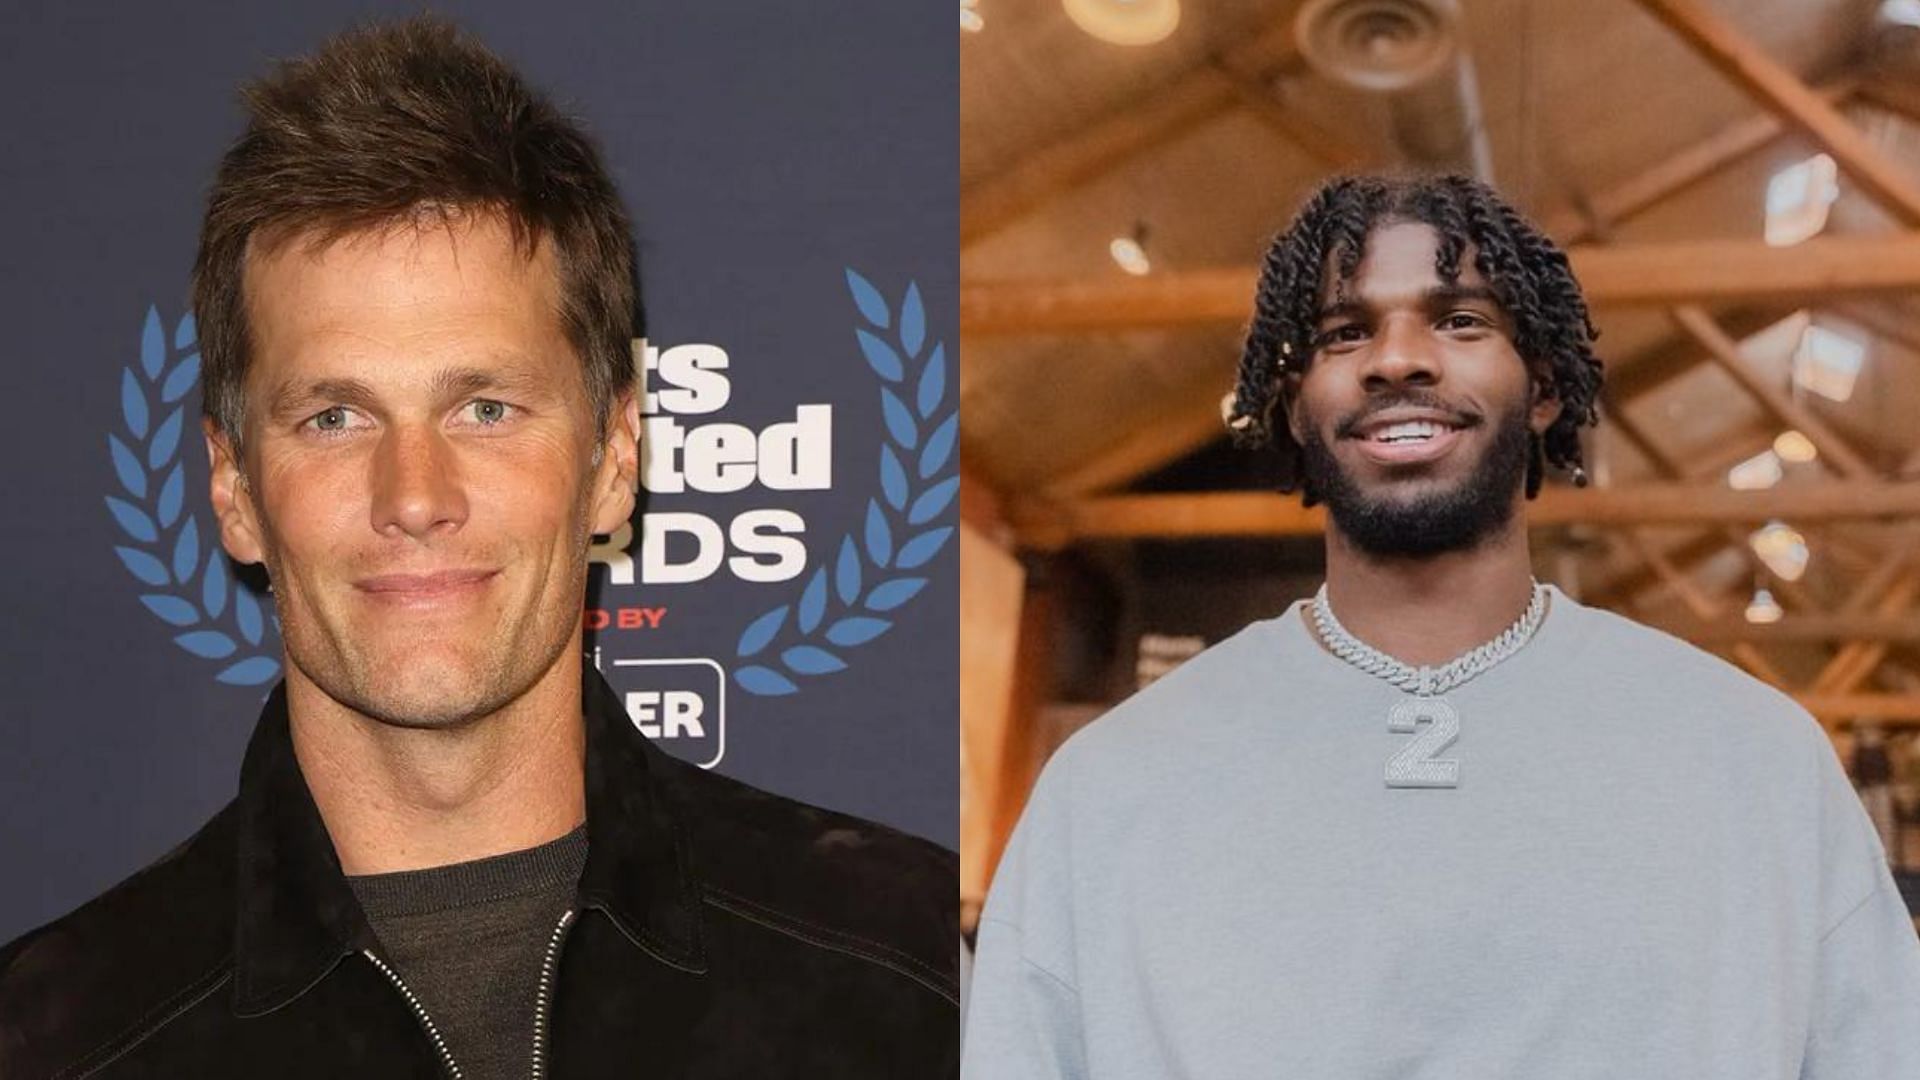 Tom Brady (L) giving Shedeur Sanders (R) advice on how to go into 